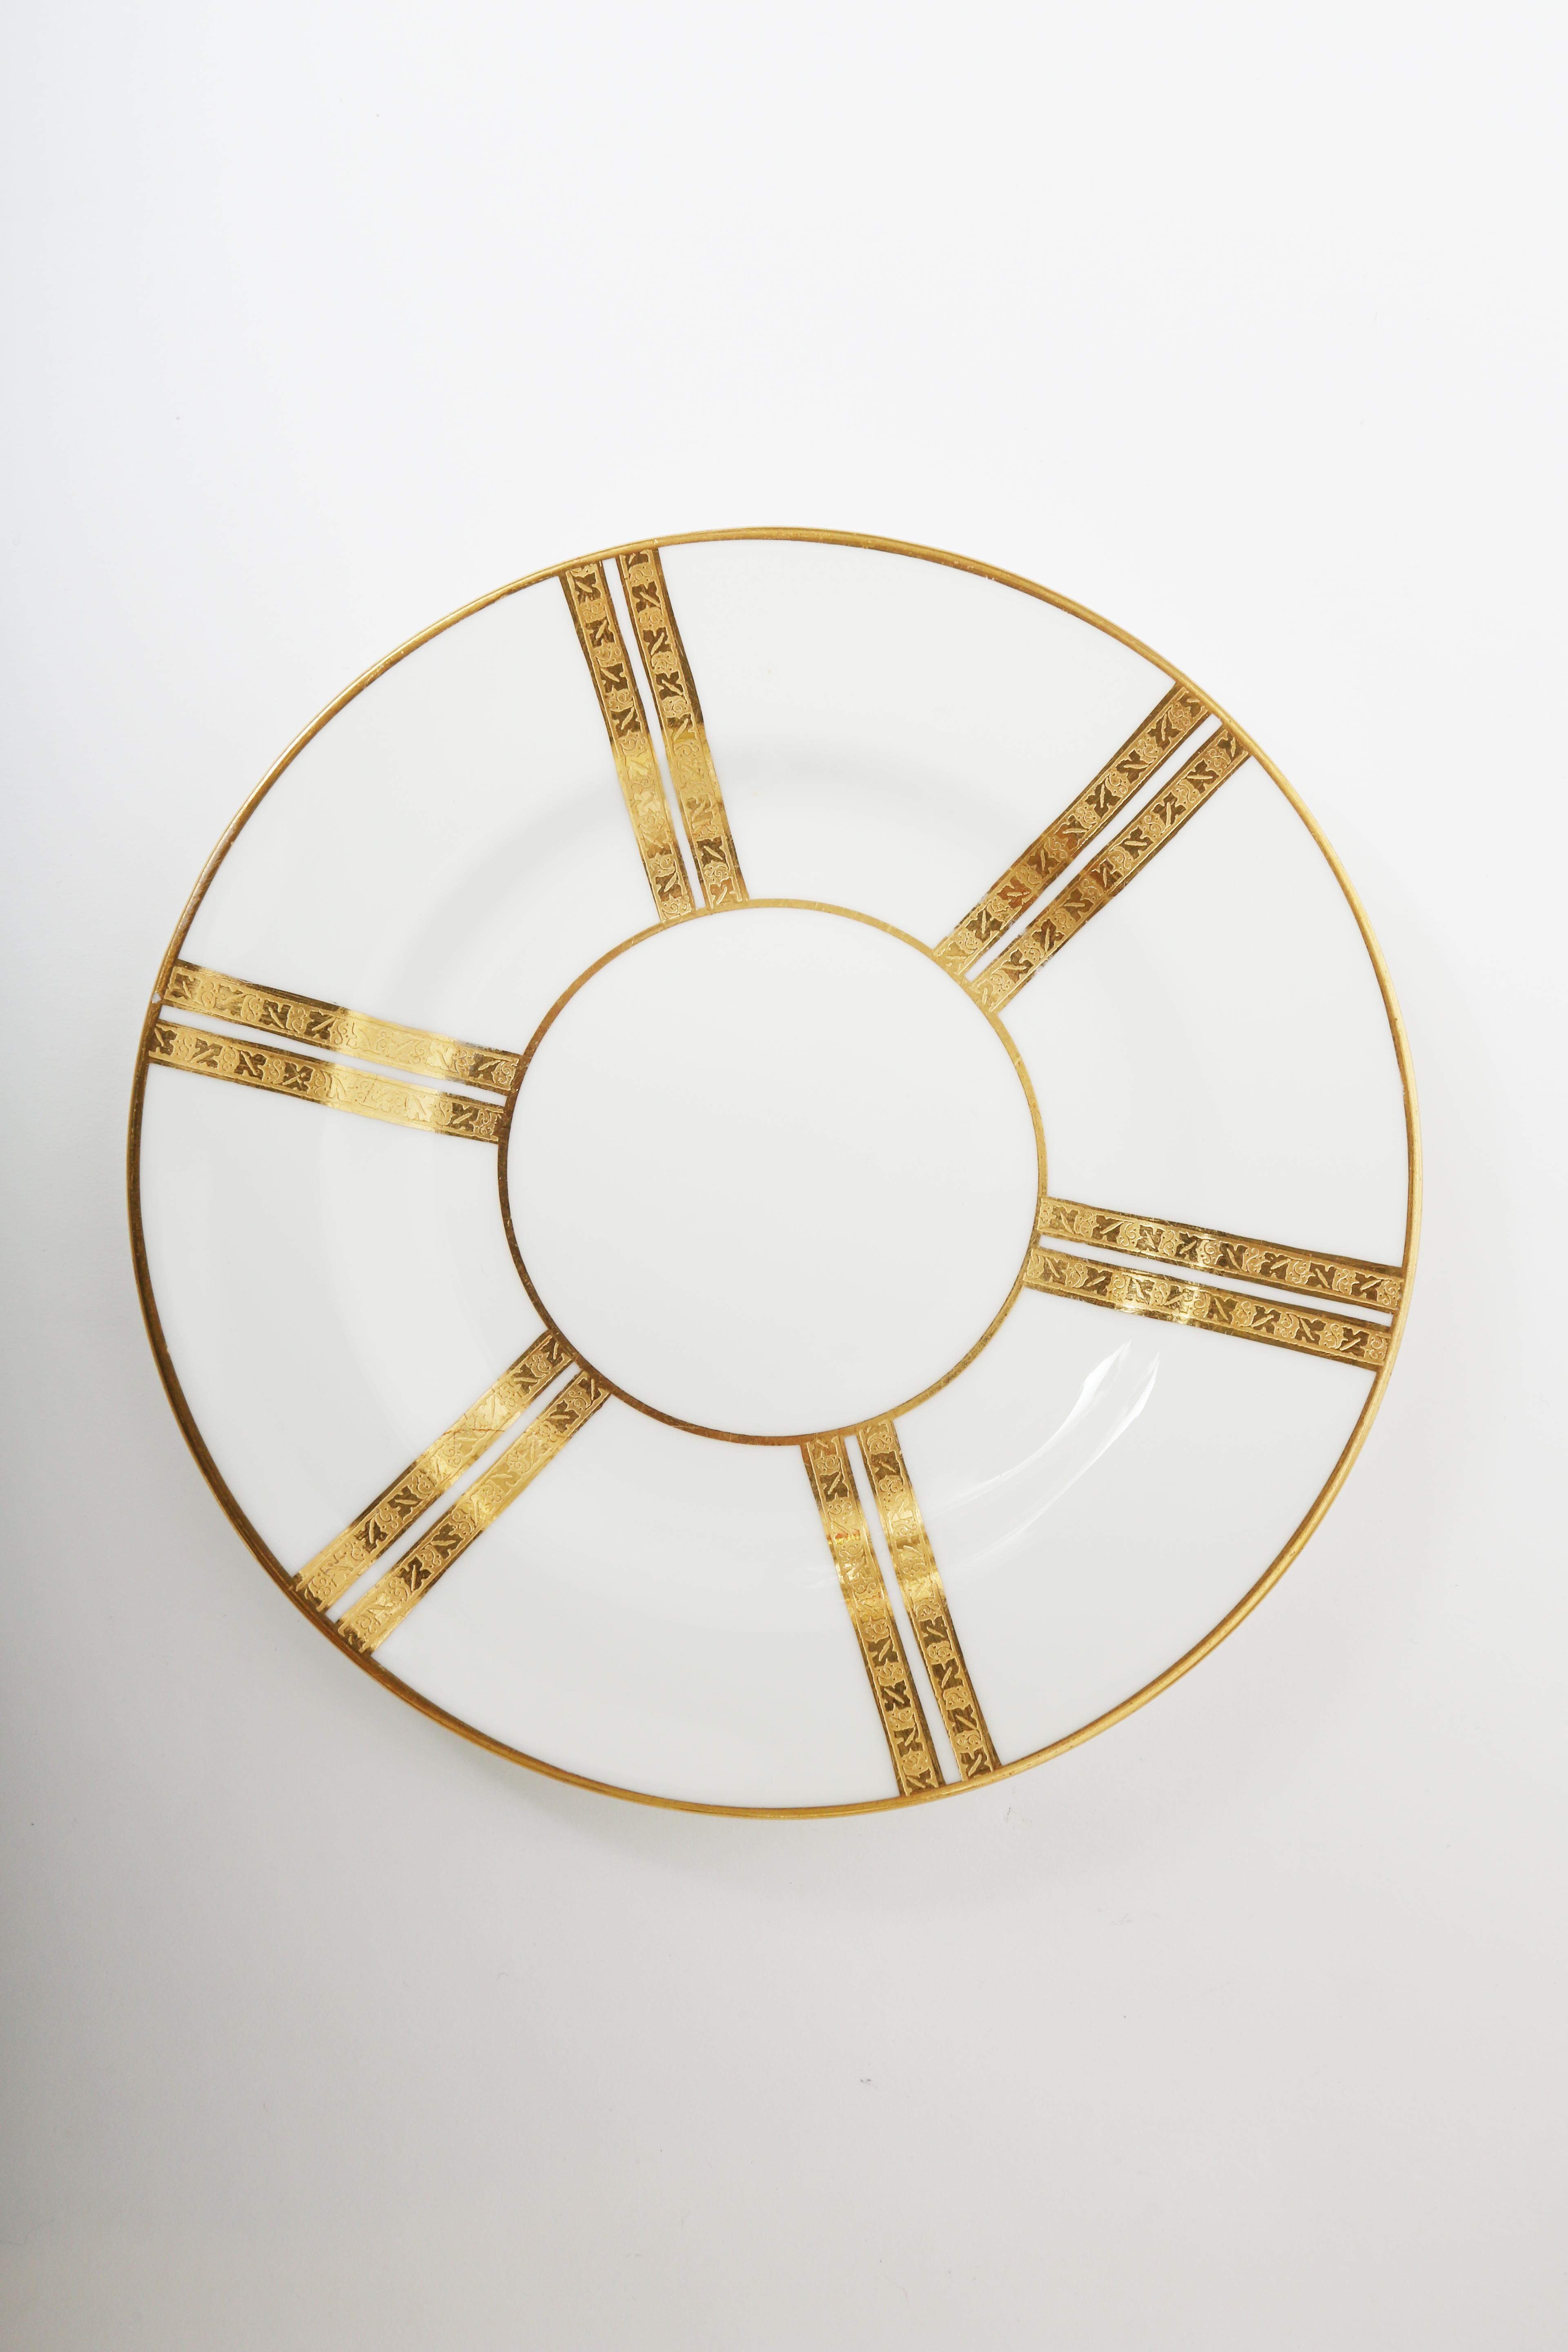 A great little set of interesting bread or side plates of fine crisp white porcelain with a 24-karat gold stripe band decoration, circa 1920. In very nice antique condition, these will mix and match in perfectly with all your fine tabletop. Custom